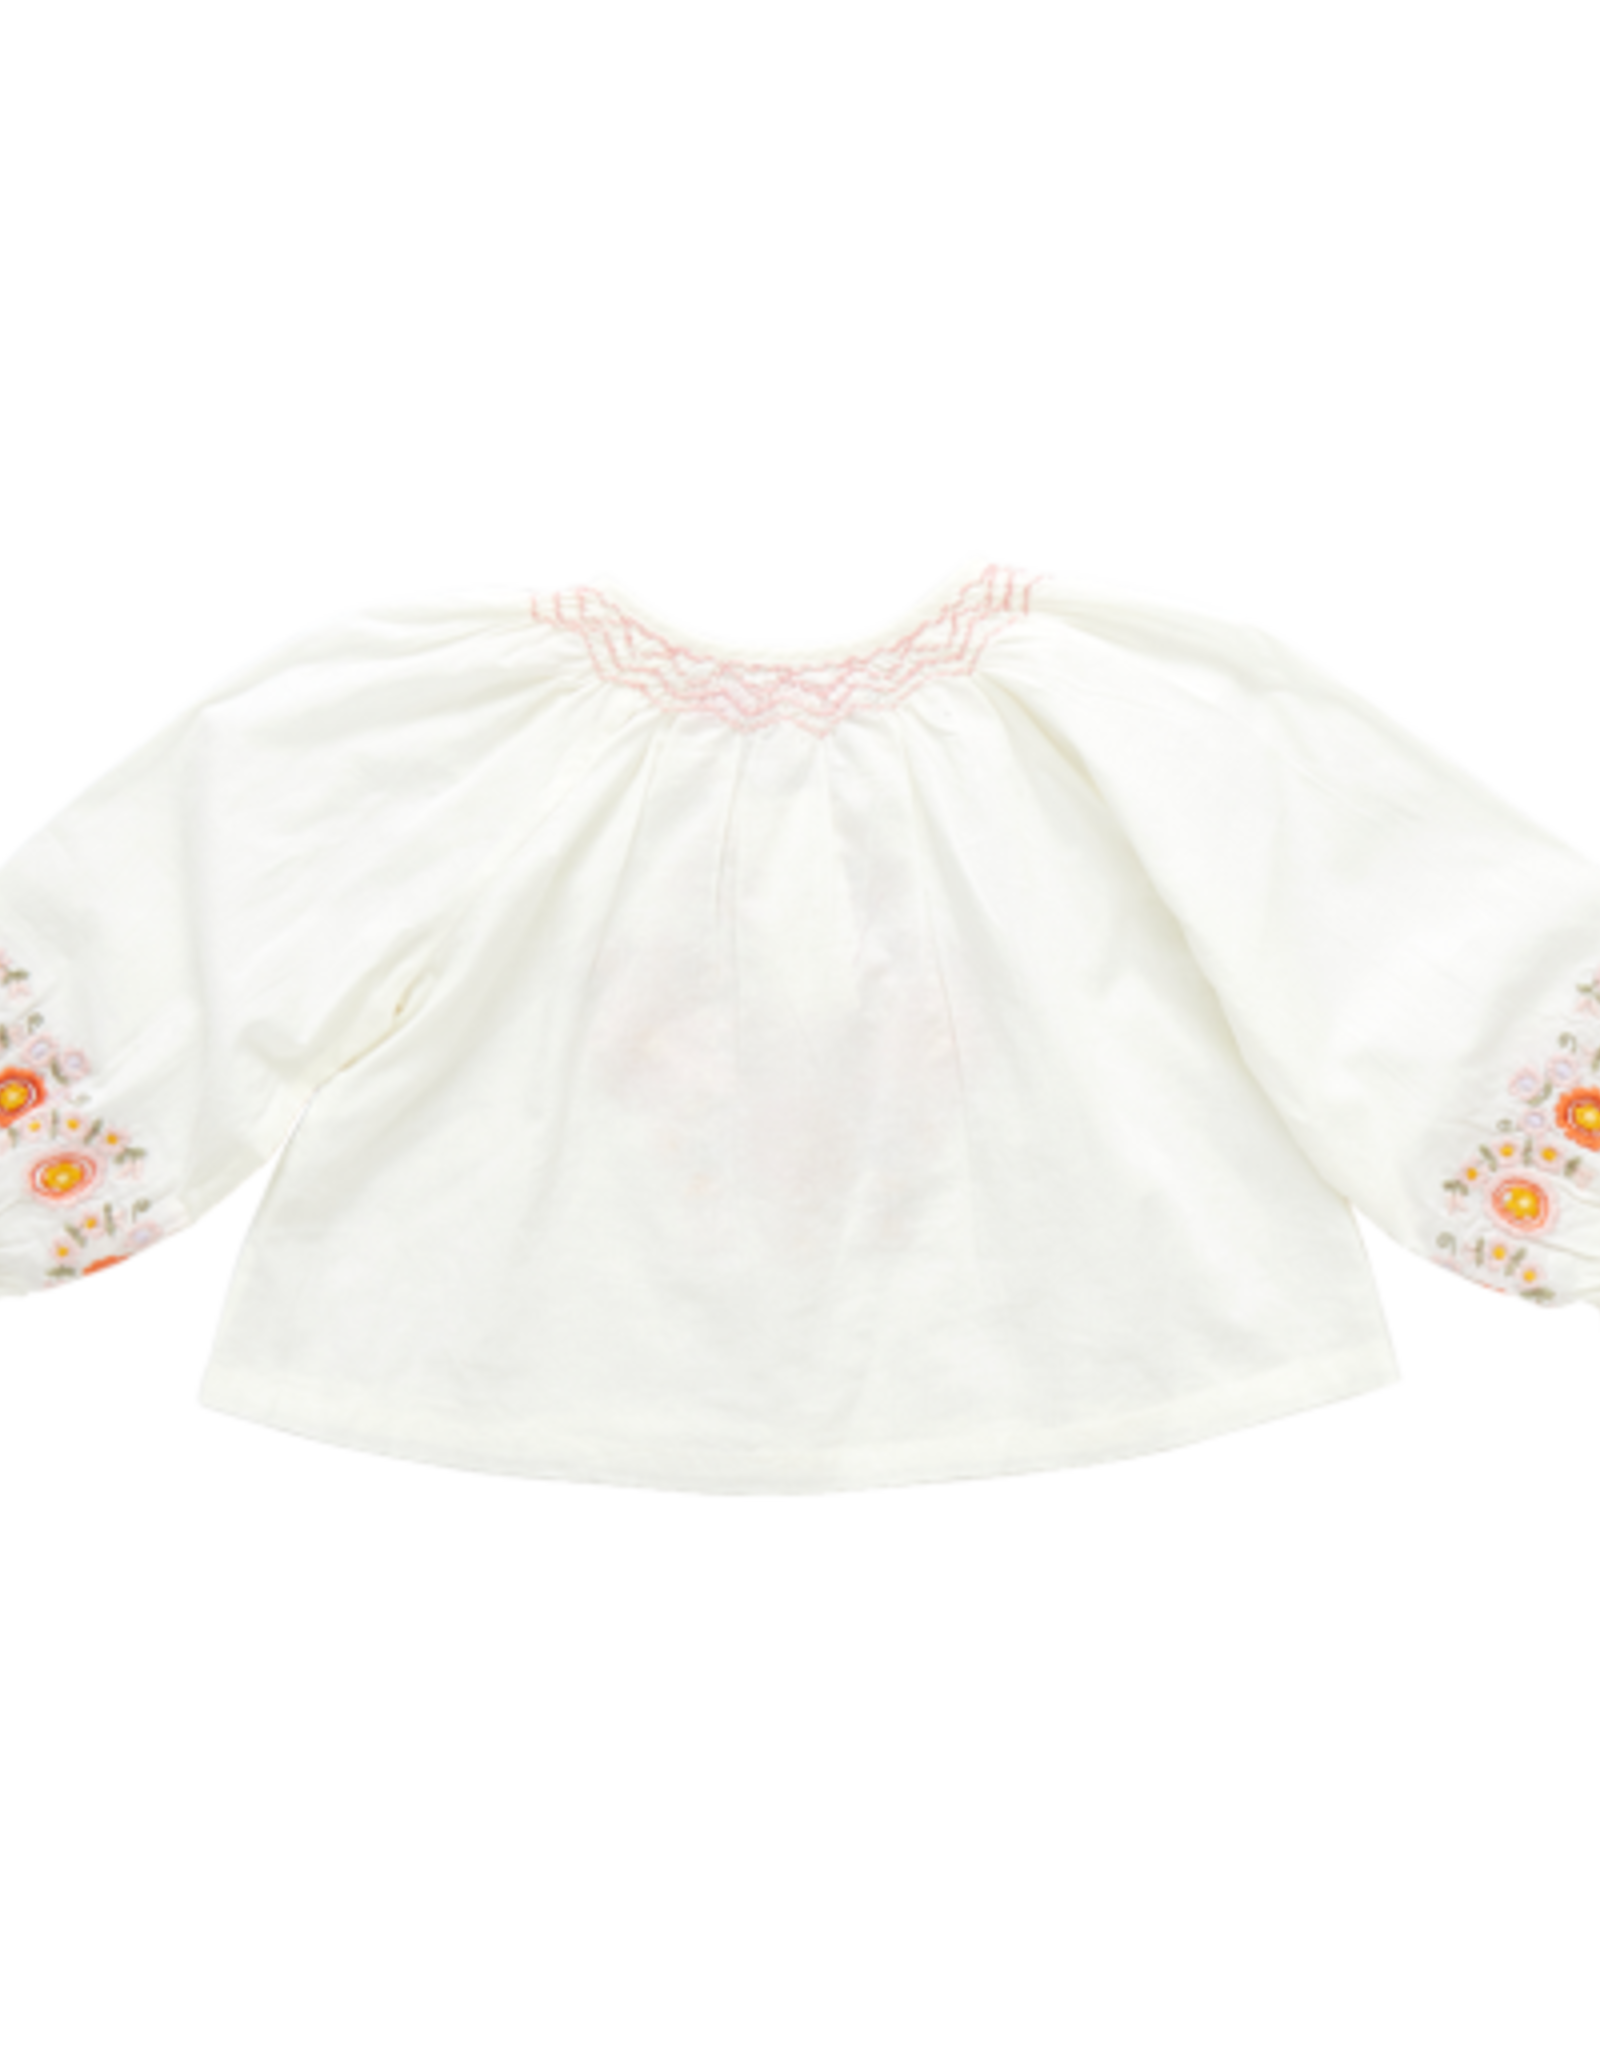 Pink Chicken girls ava top - multi pink embroidery